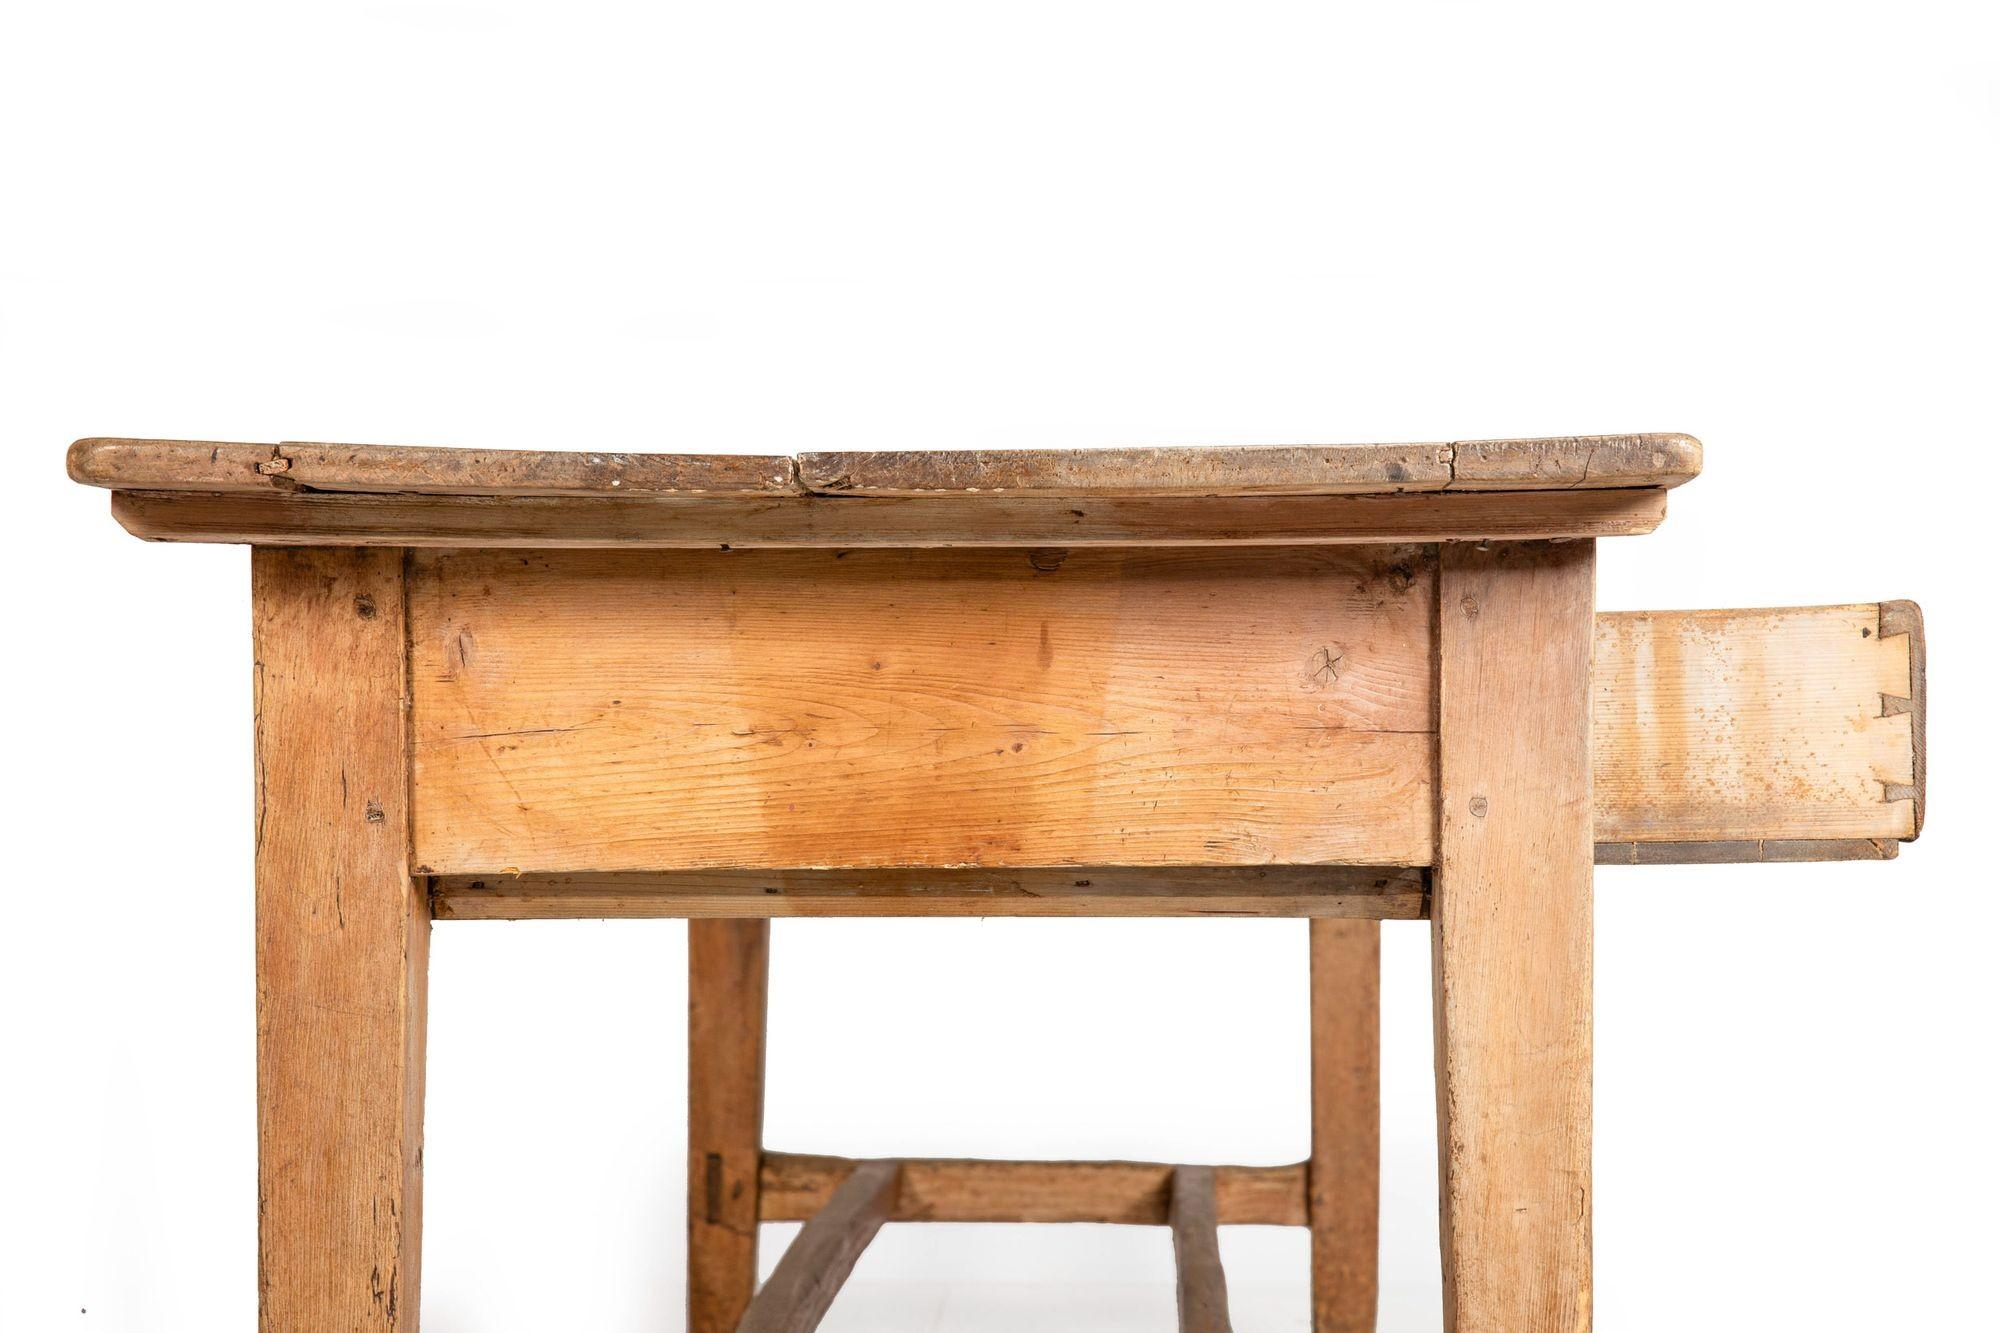 Worn and Patinated English Antique Pine Tavern Table Desk For Sale 5